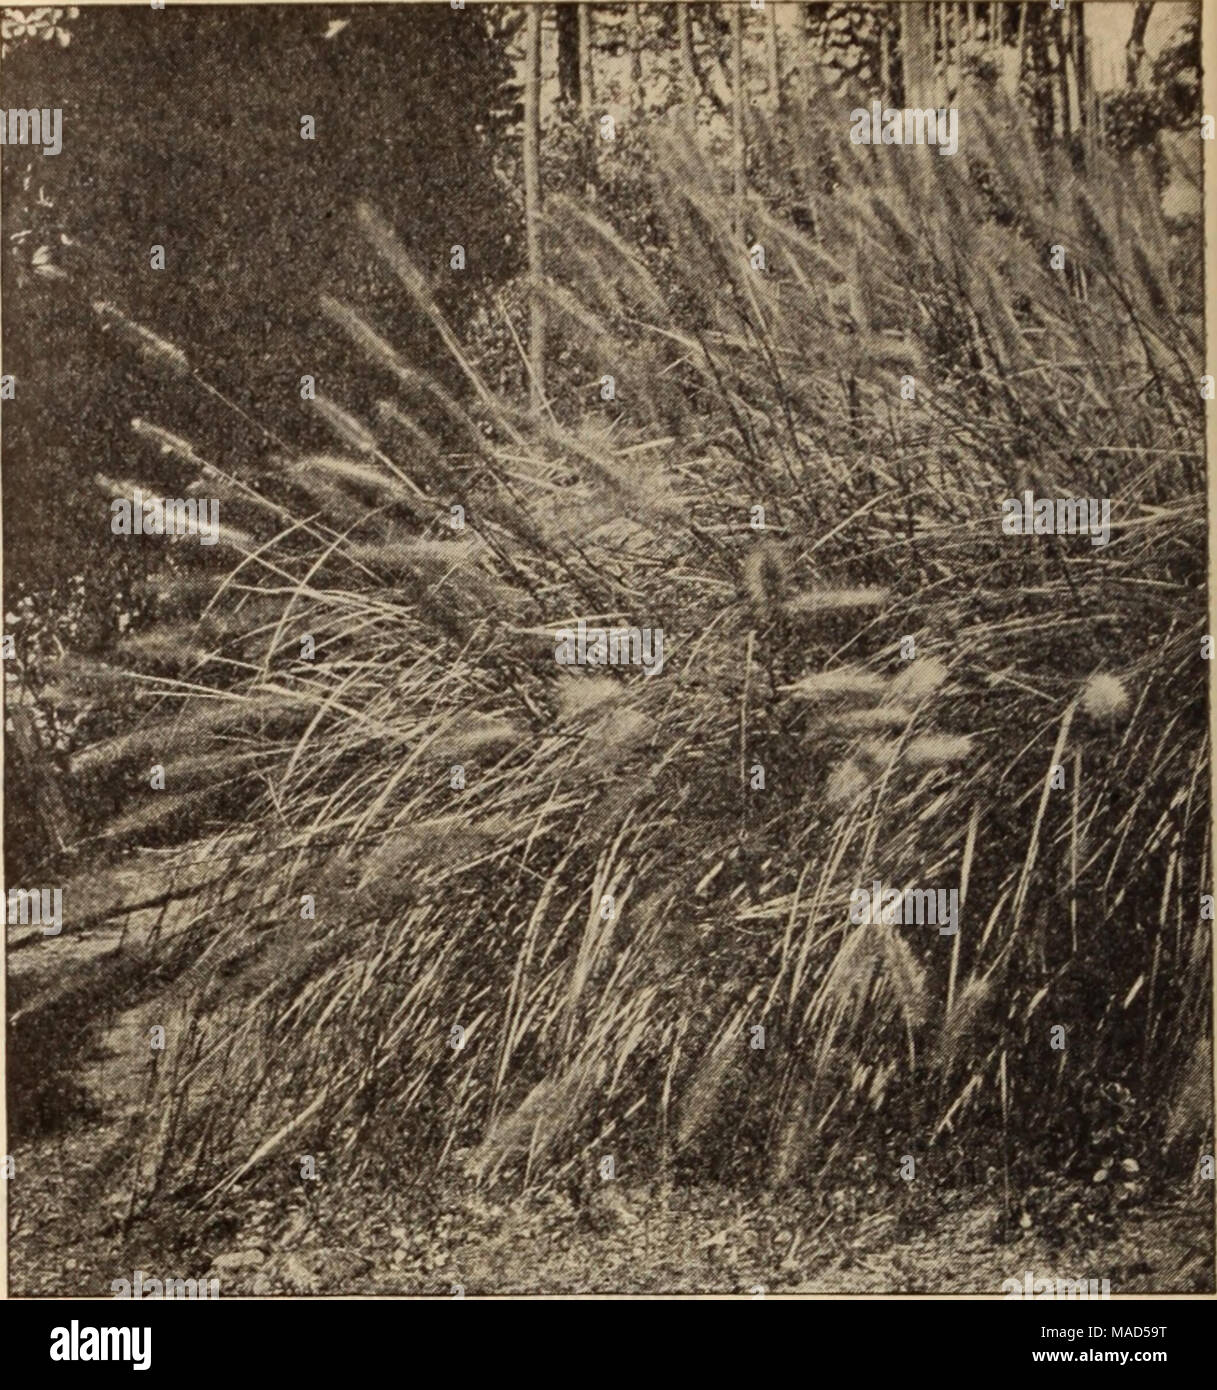 . Dreer's wholesale price list / Henry A. Dreer. . PENNISETUM JAPONICUM (Hardy Fountain Grass). Geum (Avens). Per doz. PerlOO Atrosanguineum. 3-inch pots $1 00 $7 00 Coccineum. 3-inch pots 100 7 00 Mrs. Bradshaw (New). 3-inch pots 1 50 10 00 Gillenia (Bowman's Root). Trifoliata 2 00 15 00 Variegata 3-inch pots Glechoma or Nepeta. (Variegated Groundsel or Ground Ivy), 85 00 ORNAMENTAL GRASSES. These are now used very extensively for beds, specimens on lawns, etc., etc. We grow the leading varieties in large quantities. For full descriptions, see pages 219 and 220 of our Garden Book for 1913. Pe Stock Photo